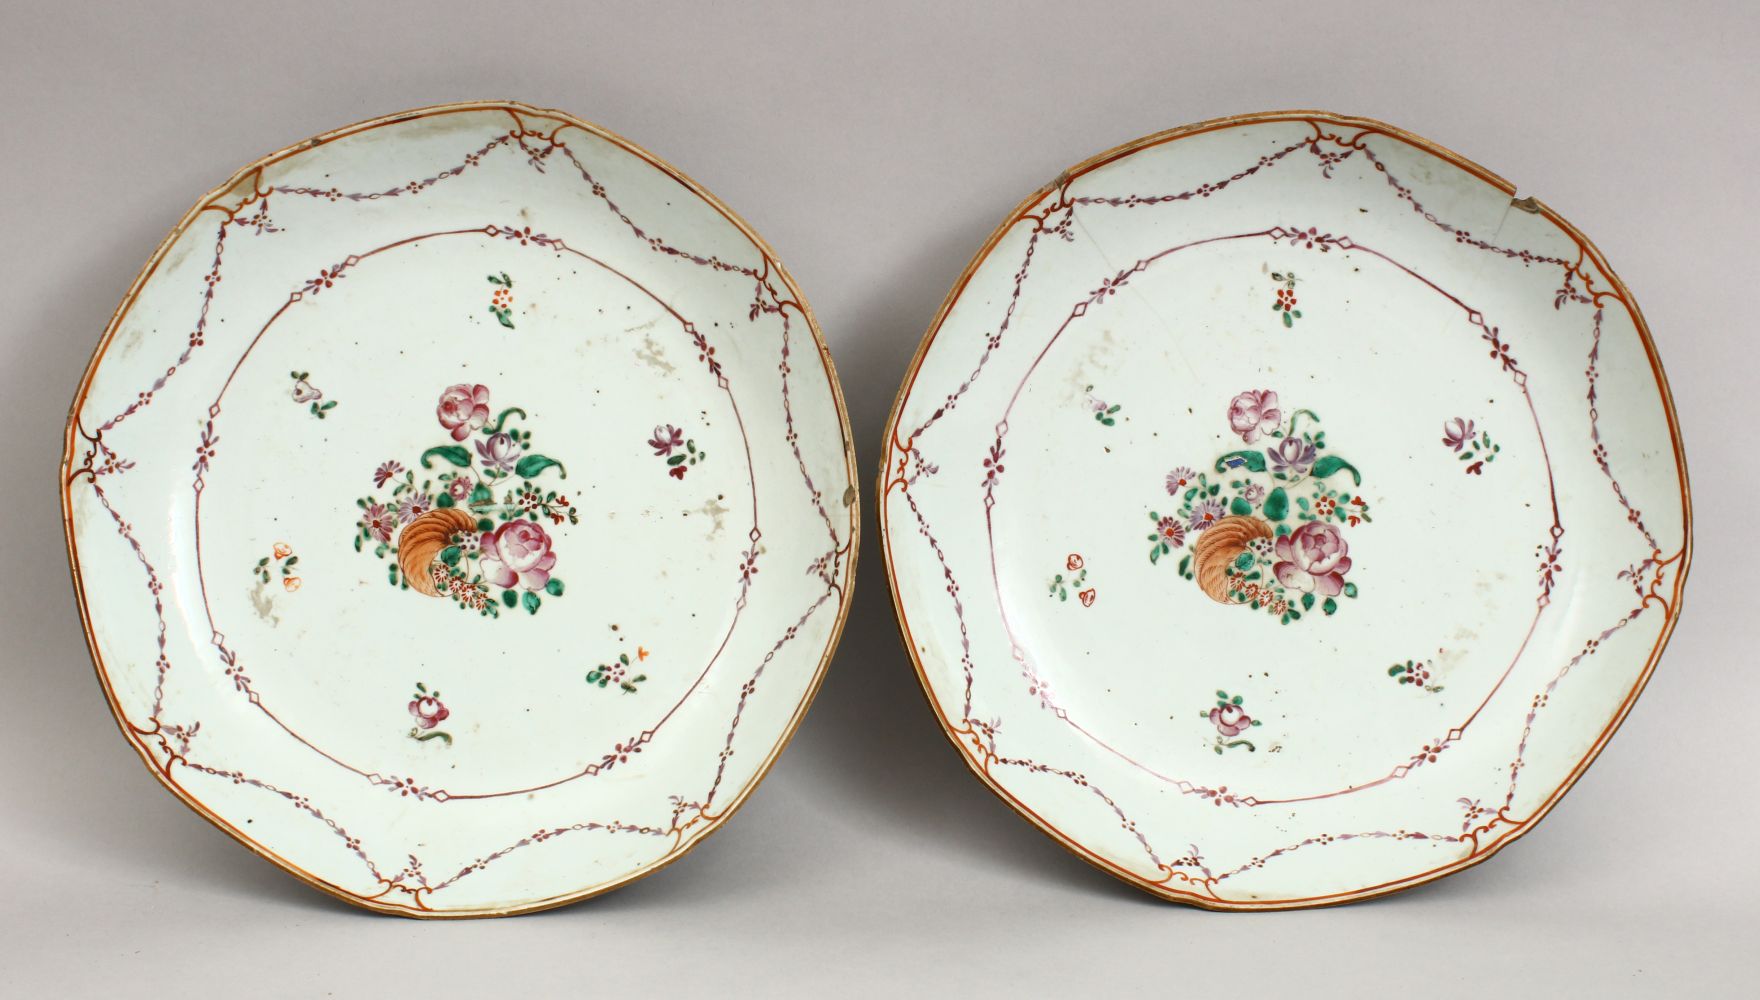 A PAIR OF 18TH CENTURY CHINESE FAMILLE ROSE QIANLONG PORCELAIN PLATES, with floral decoration, 27.